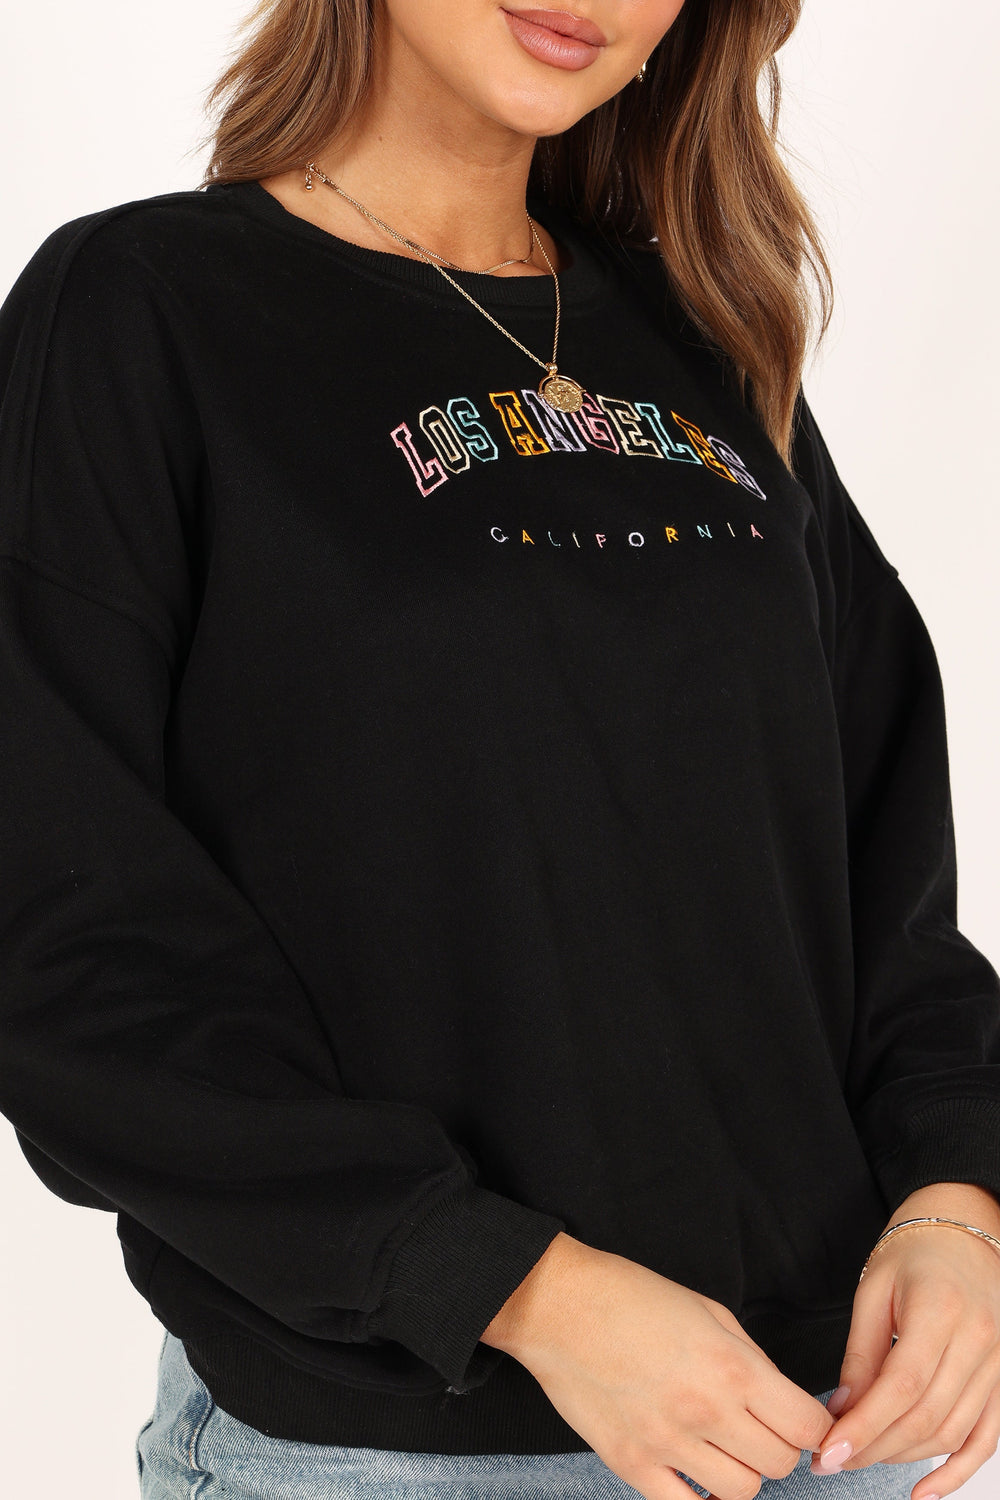 OUTERWEAR @Los Angeles Multi Color Embroidered Sweatshirt - Black